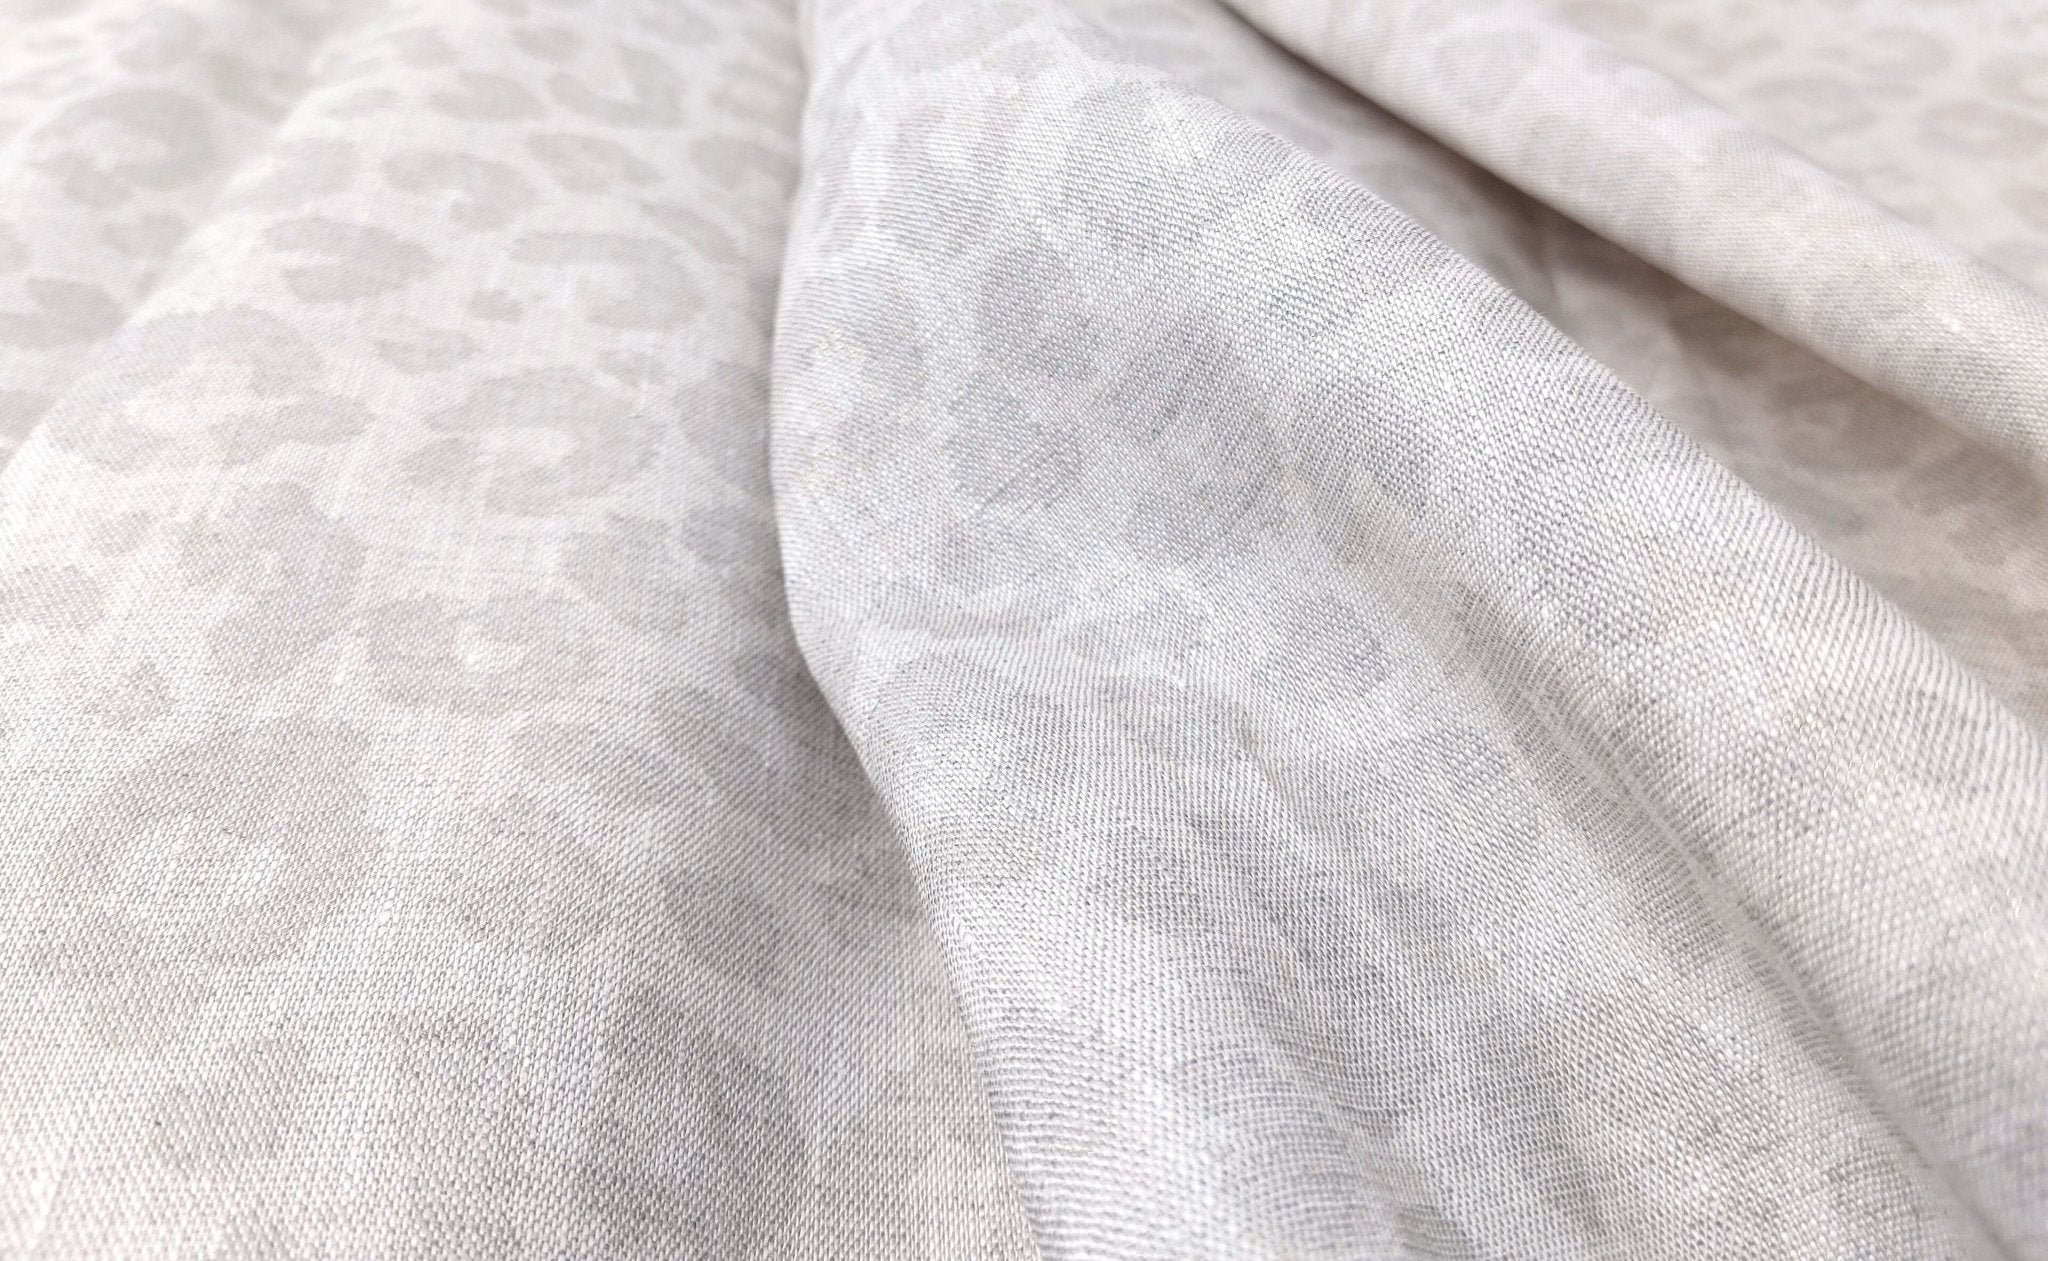 Luxe Safari Elegance: 100% Linen Fabric in Natural Hue with Gold Foil Leopard Print - The Linen Lab - Natural